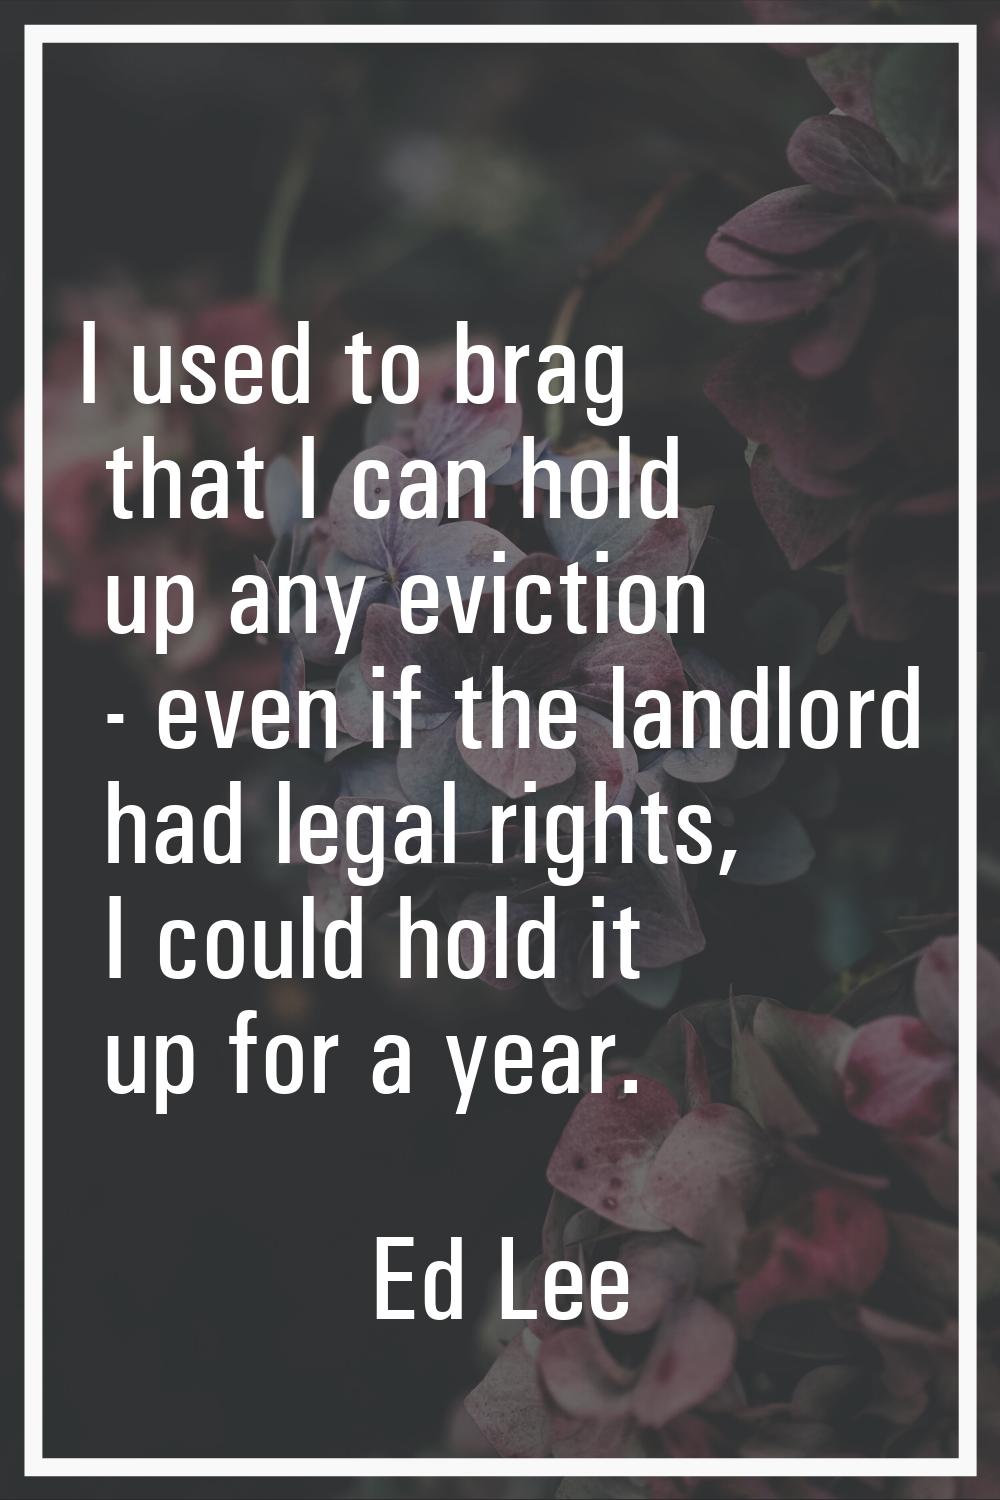 I used to brag that I can hold up any eviction - even if the landlord had legal rights, I could hol